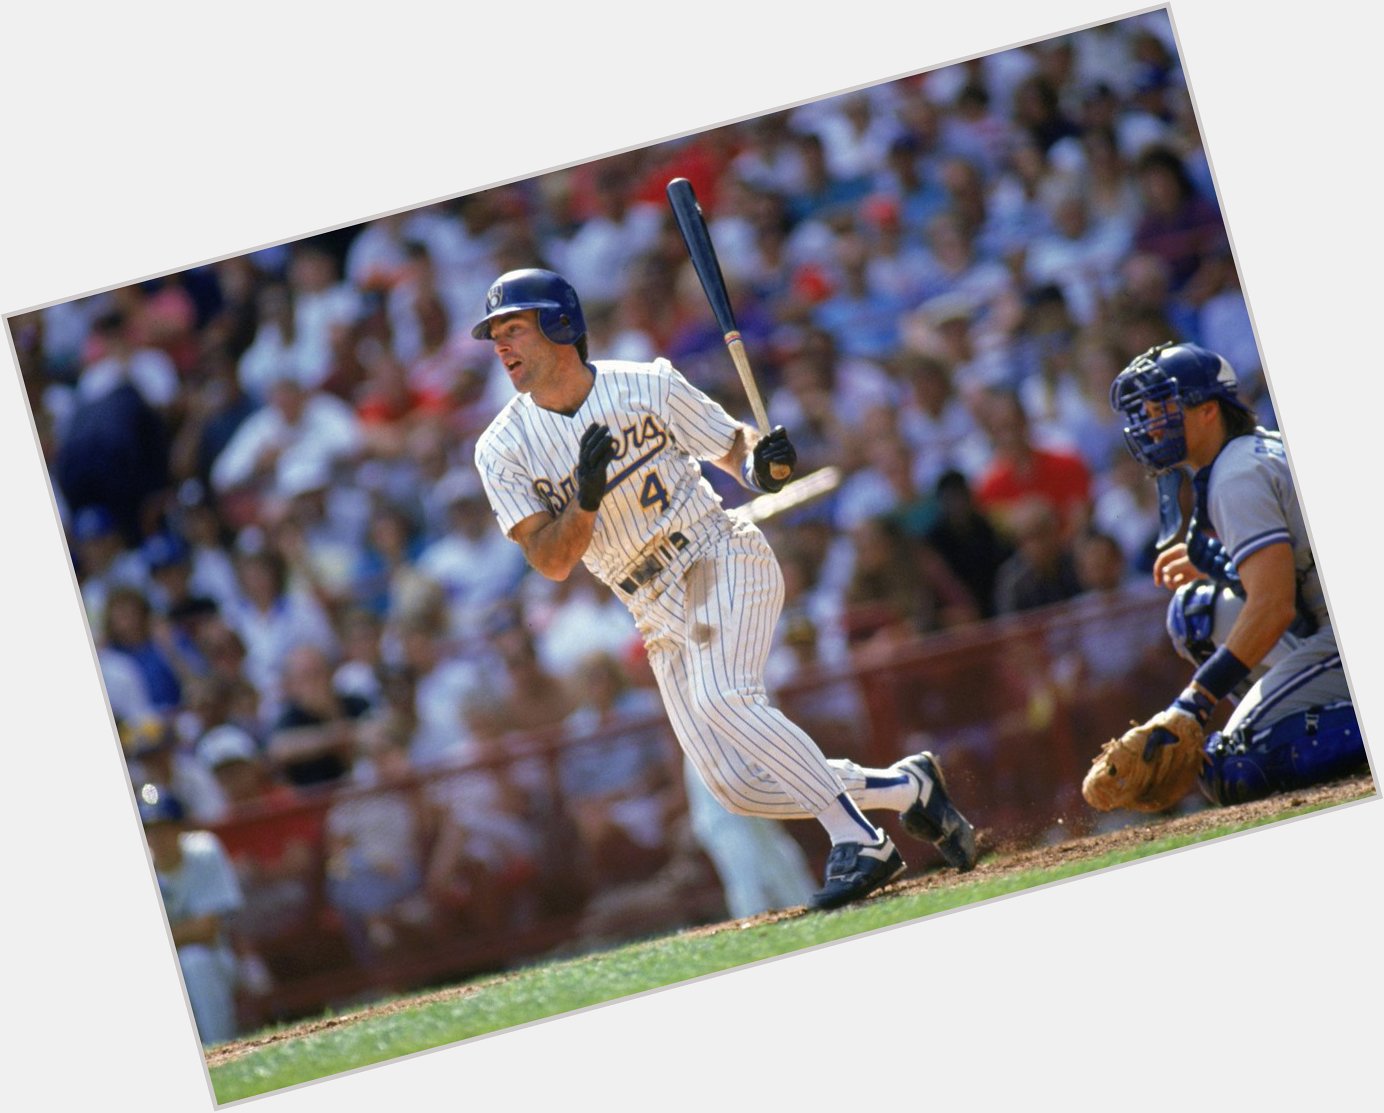 Happy Birthday to Paul Molitor, who turns 61 today! 